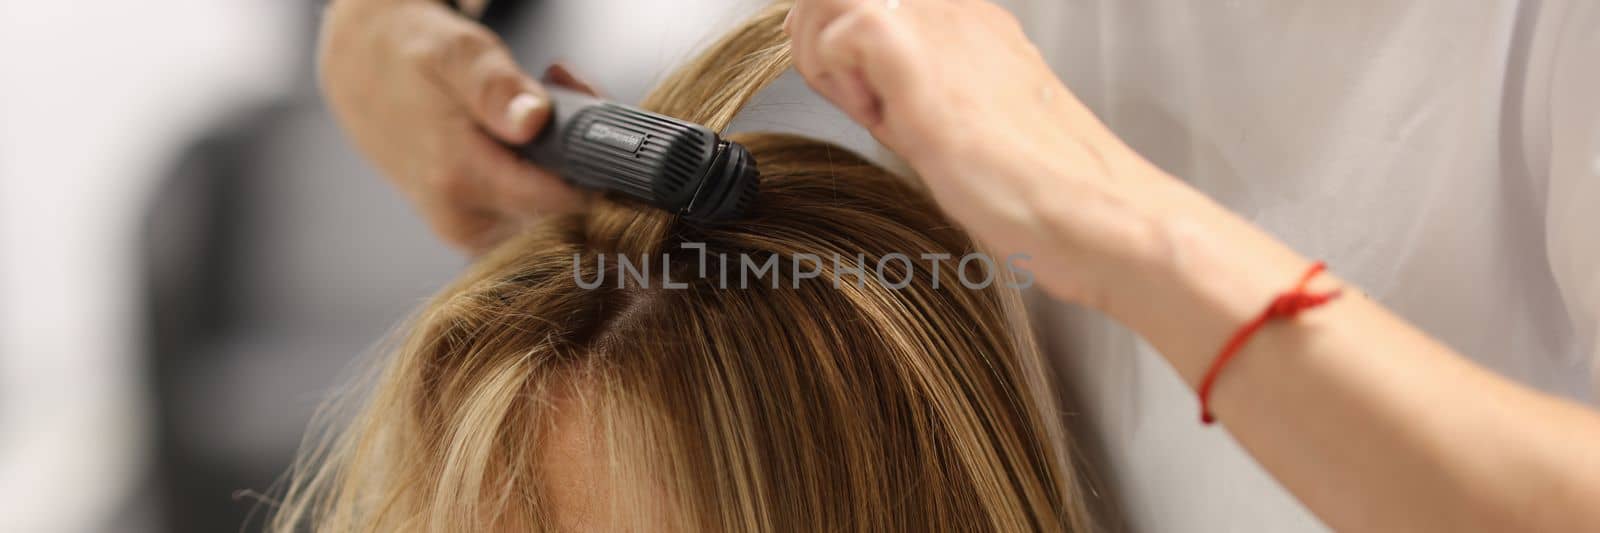 Pulling strands of hair with professional iron care. Keratin straightening and hair restoration